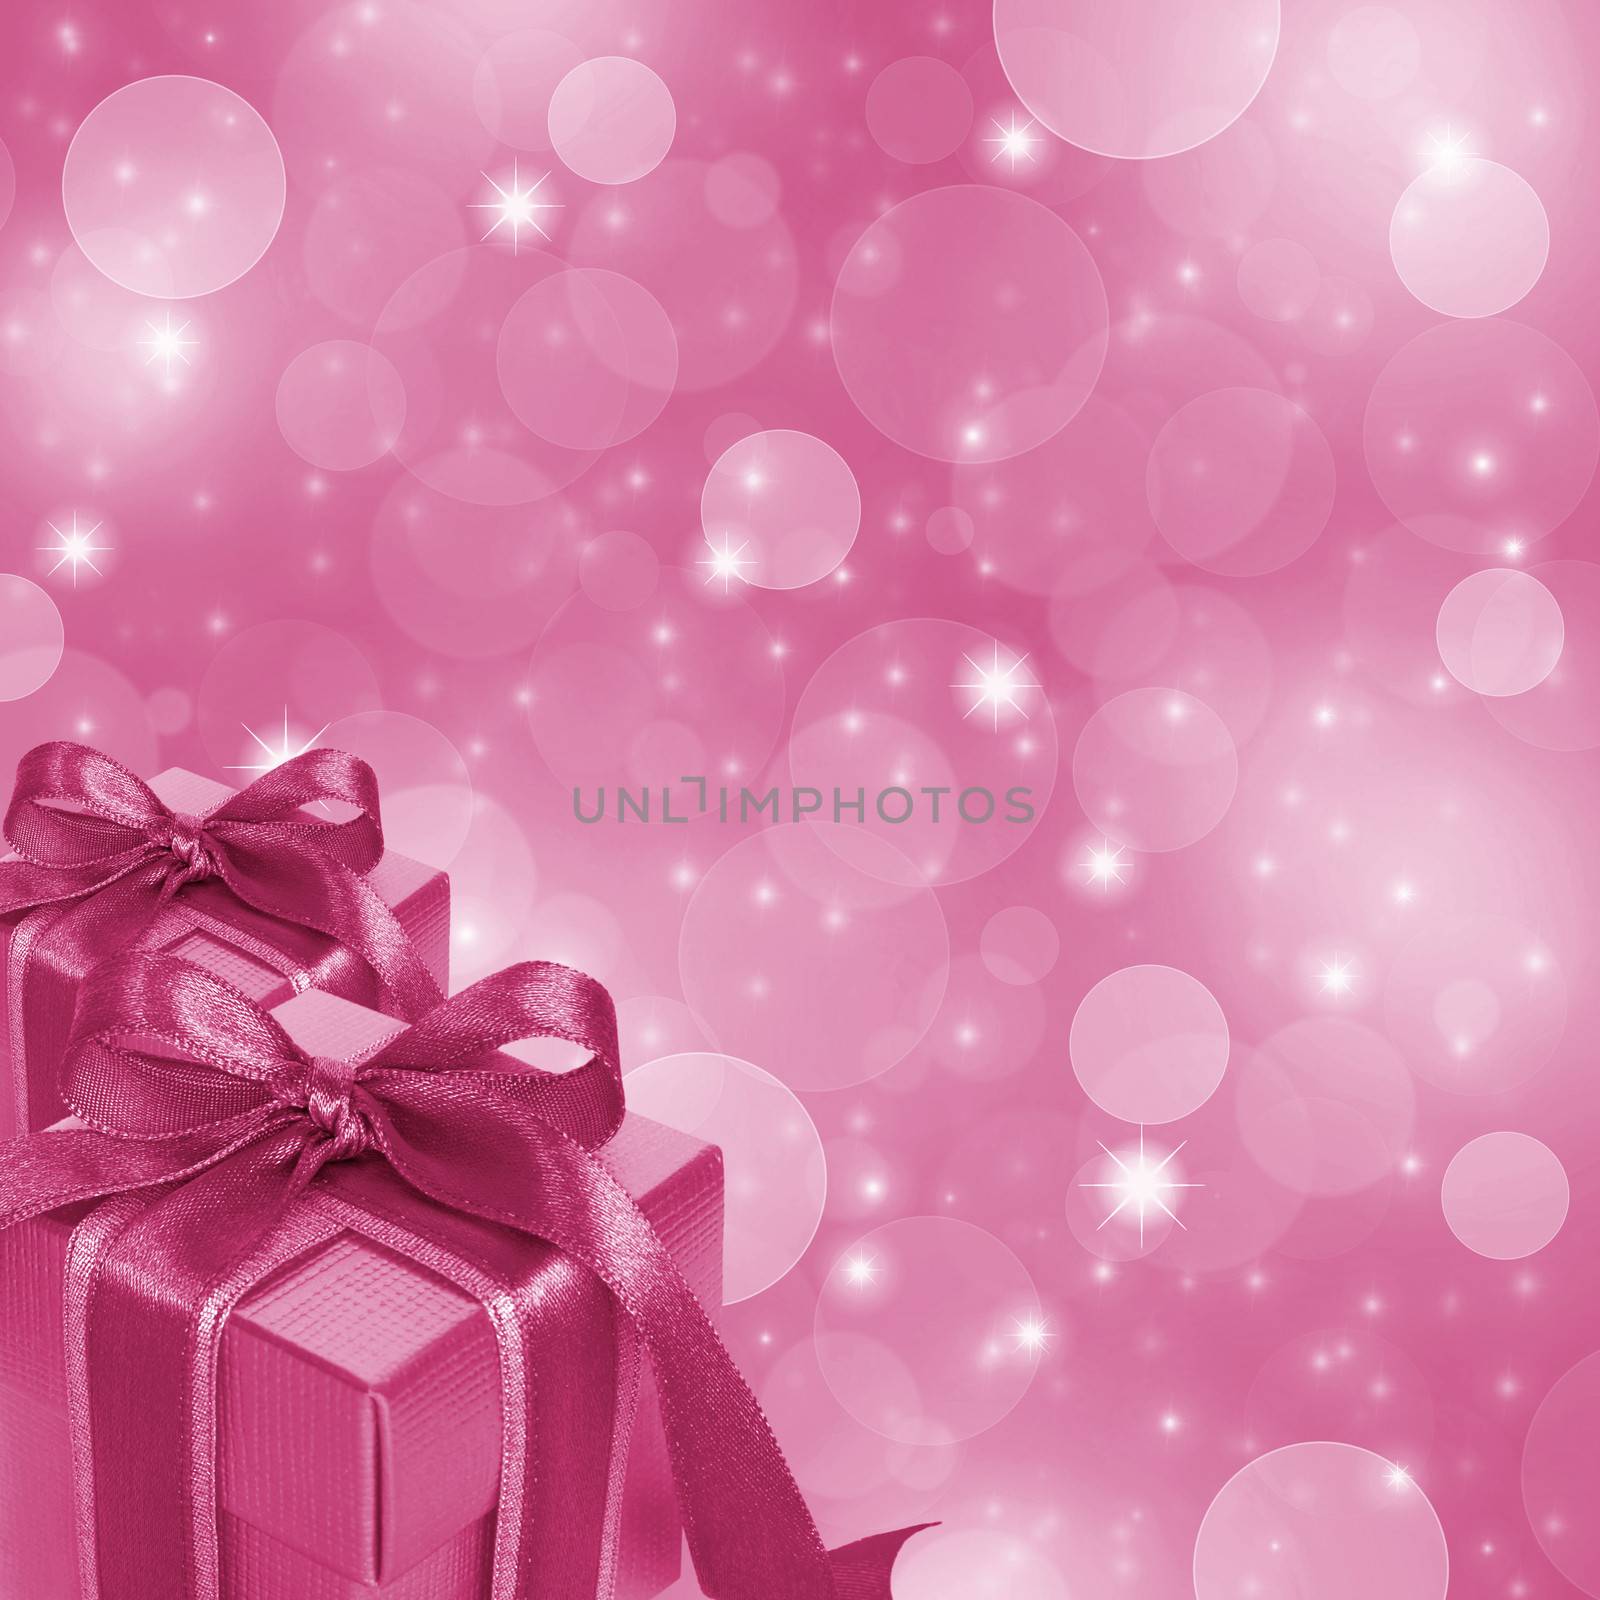 Pink gift boxes on abstract pink glitter background